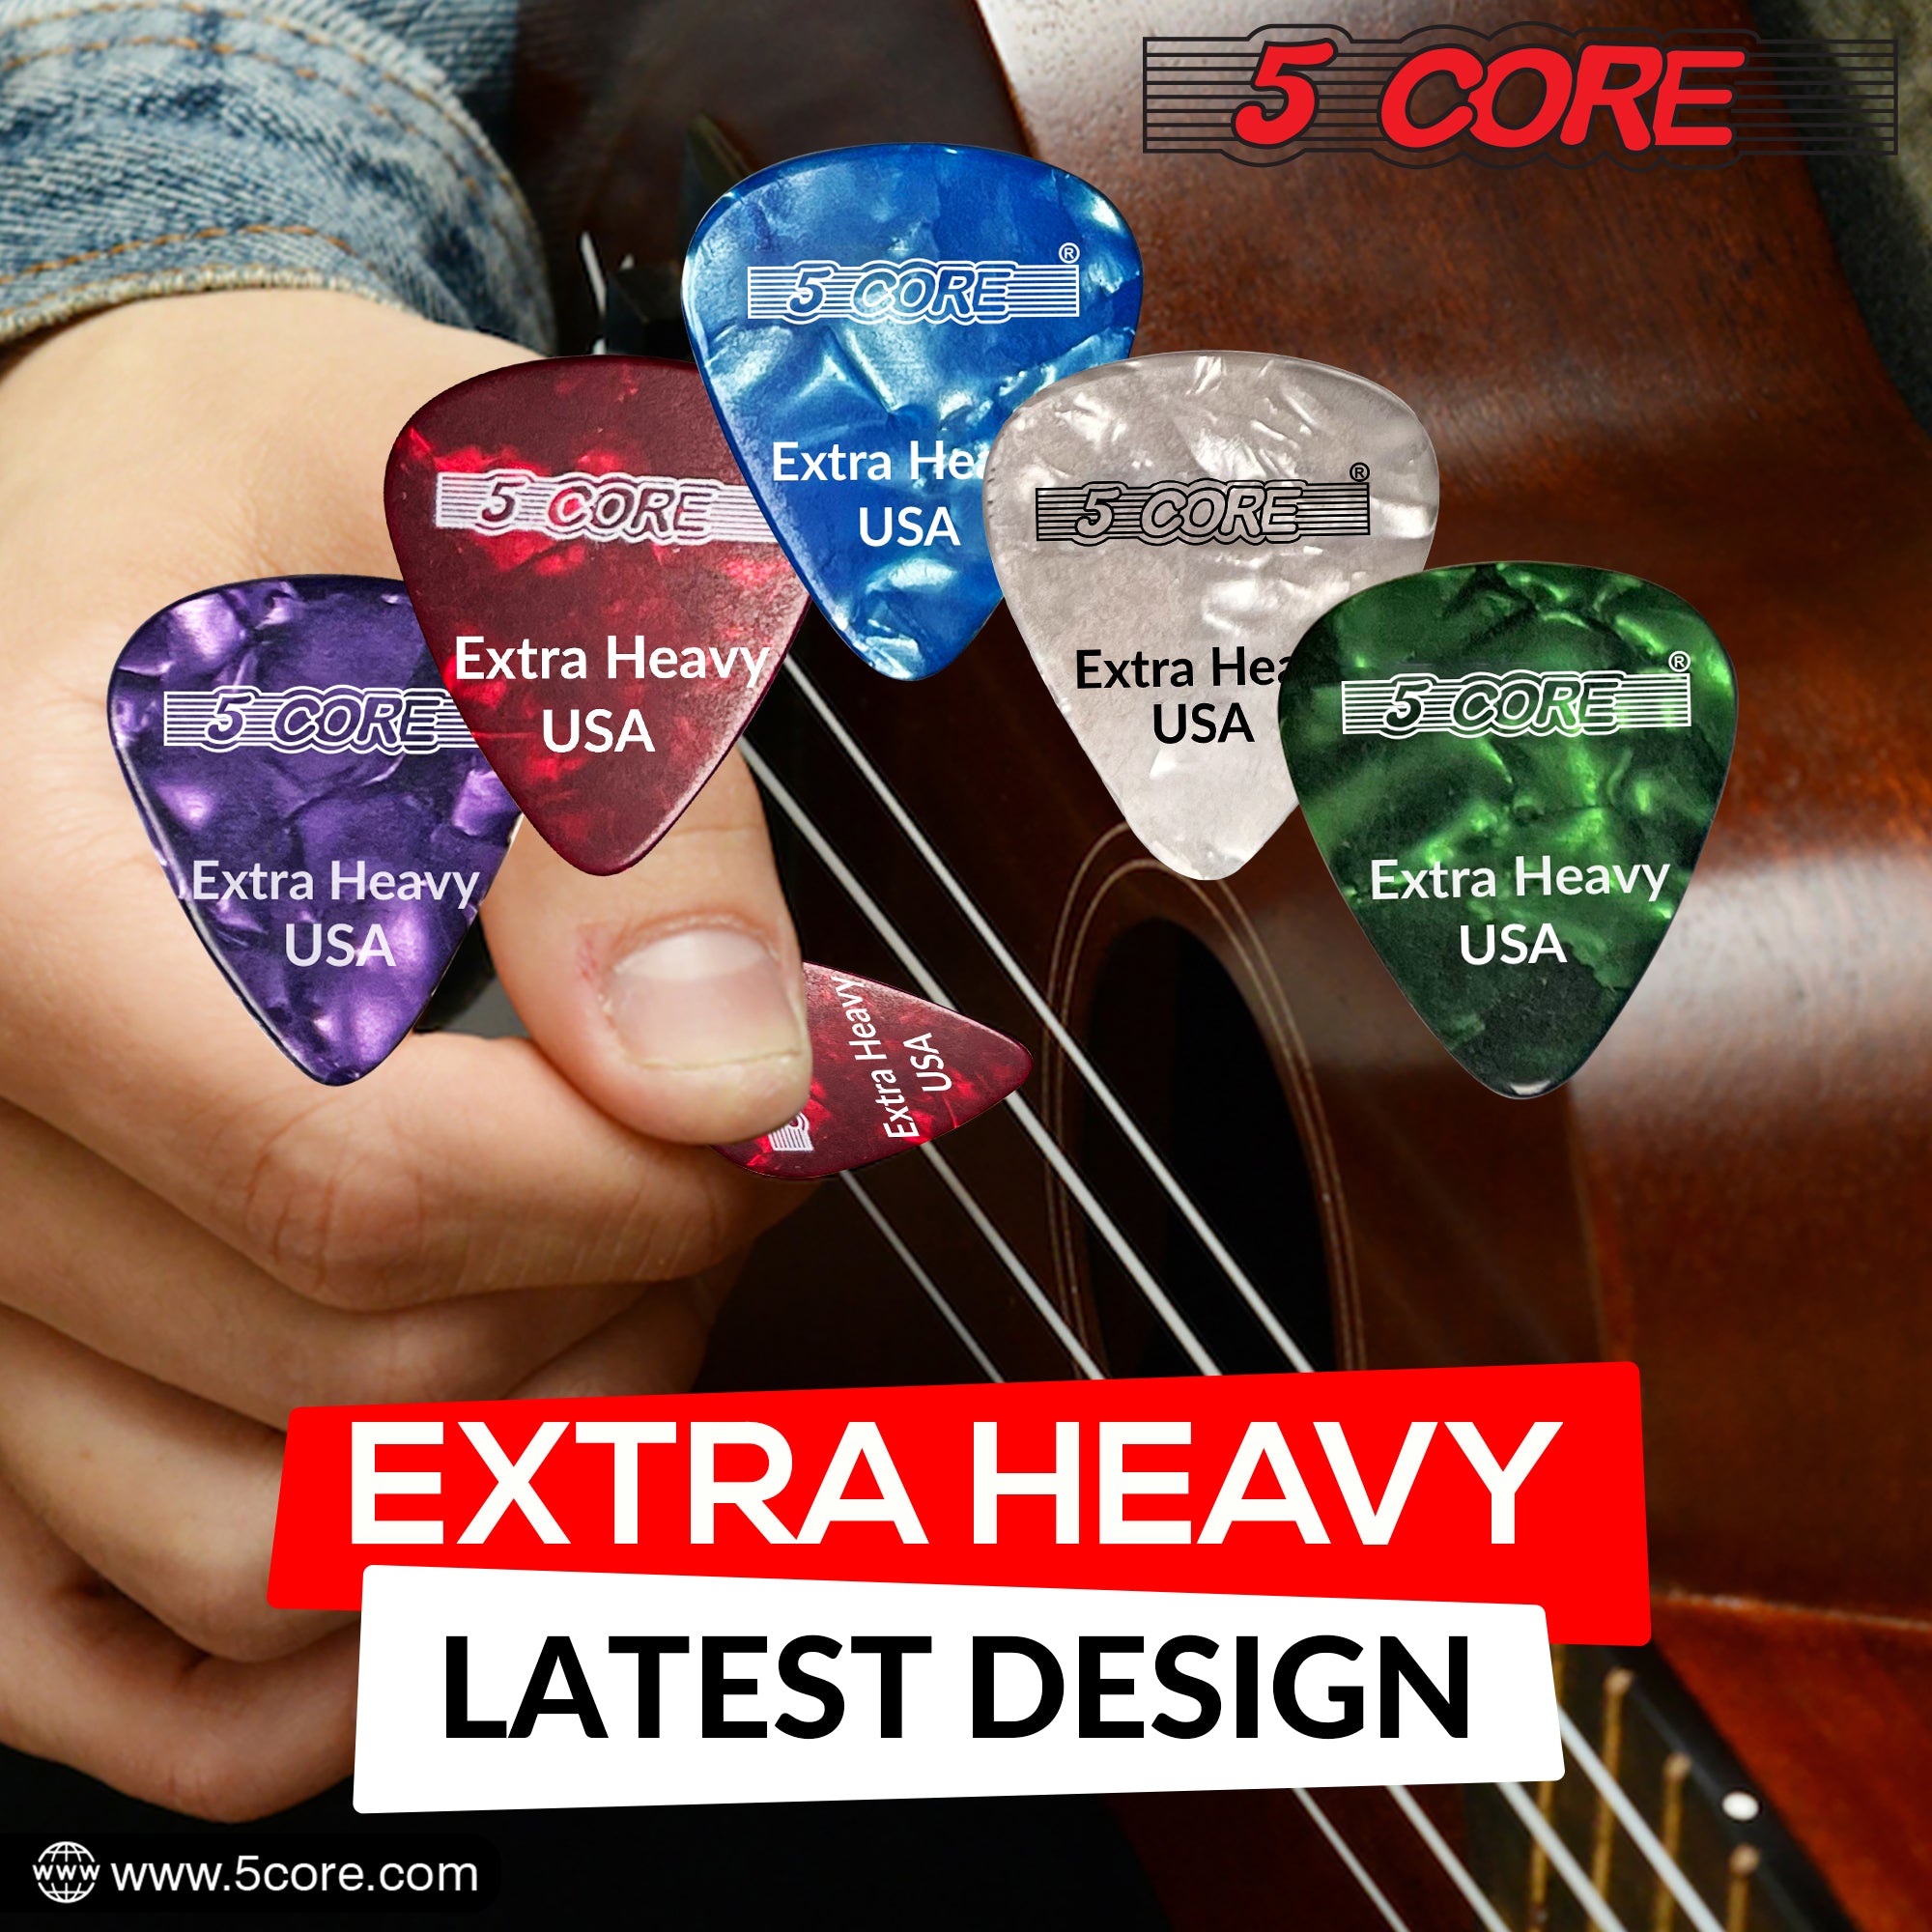 5 Core Celluloid Guitar Picks 12Pack  Extra Heavy Gauge Plectrums for Acoustic Electric Bass Guitar